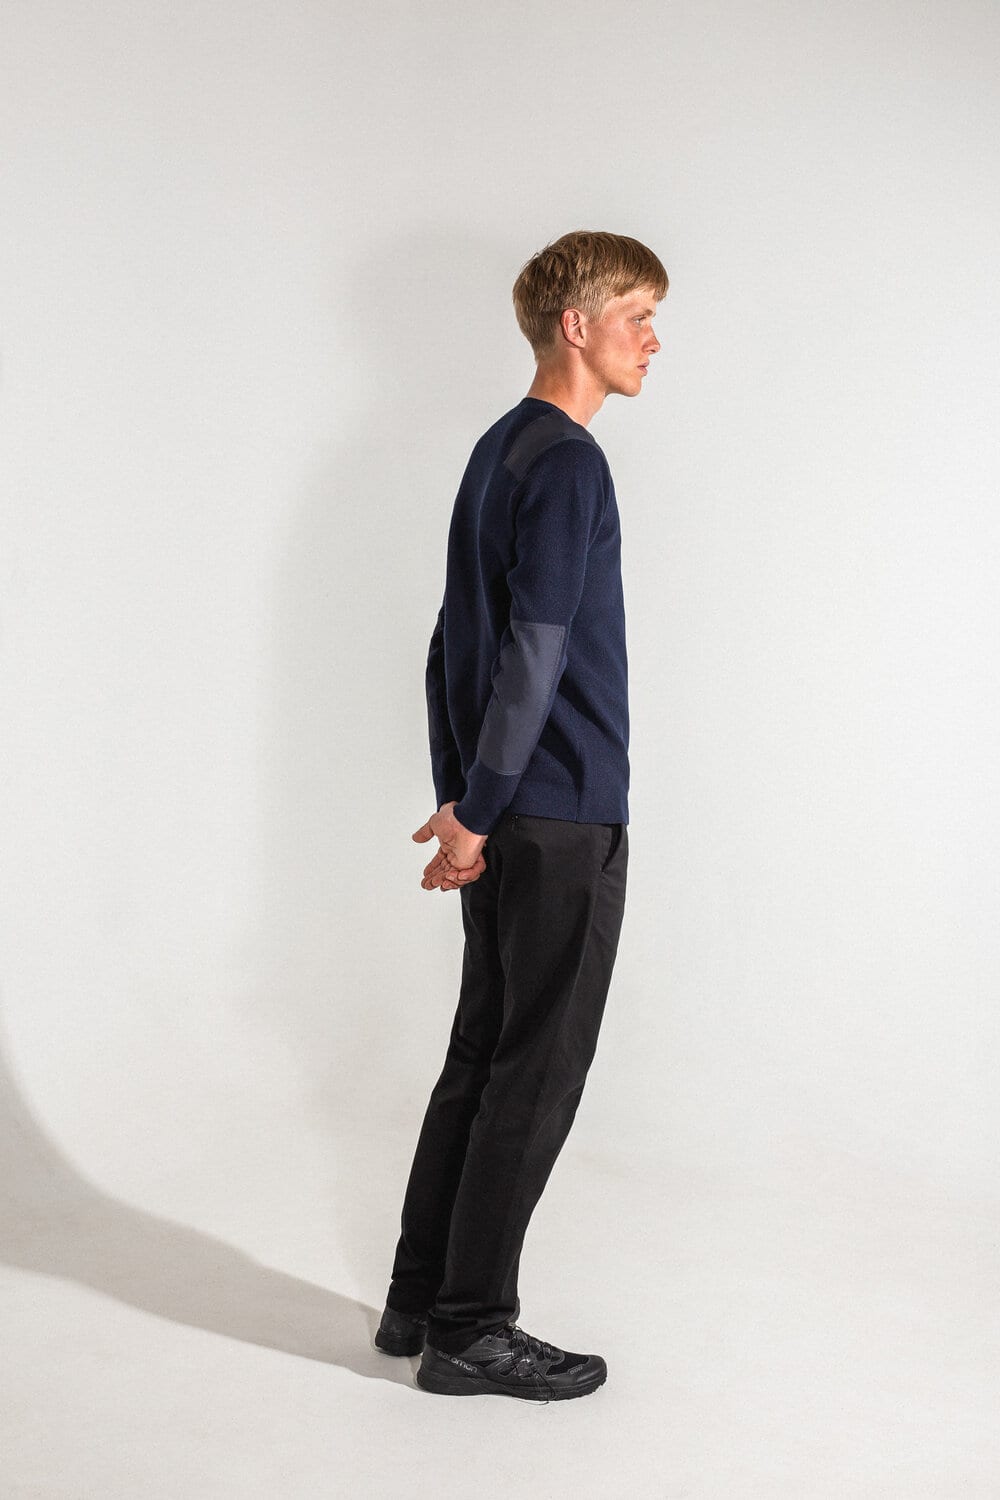 lookbook norse projects sp20 Premium Function 16